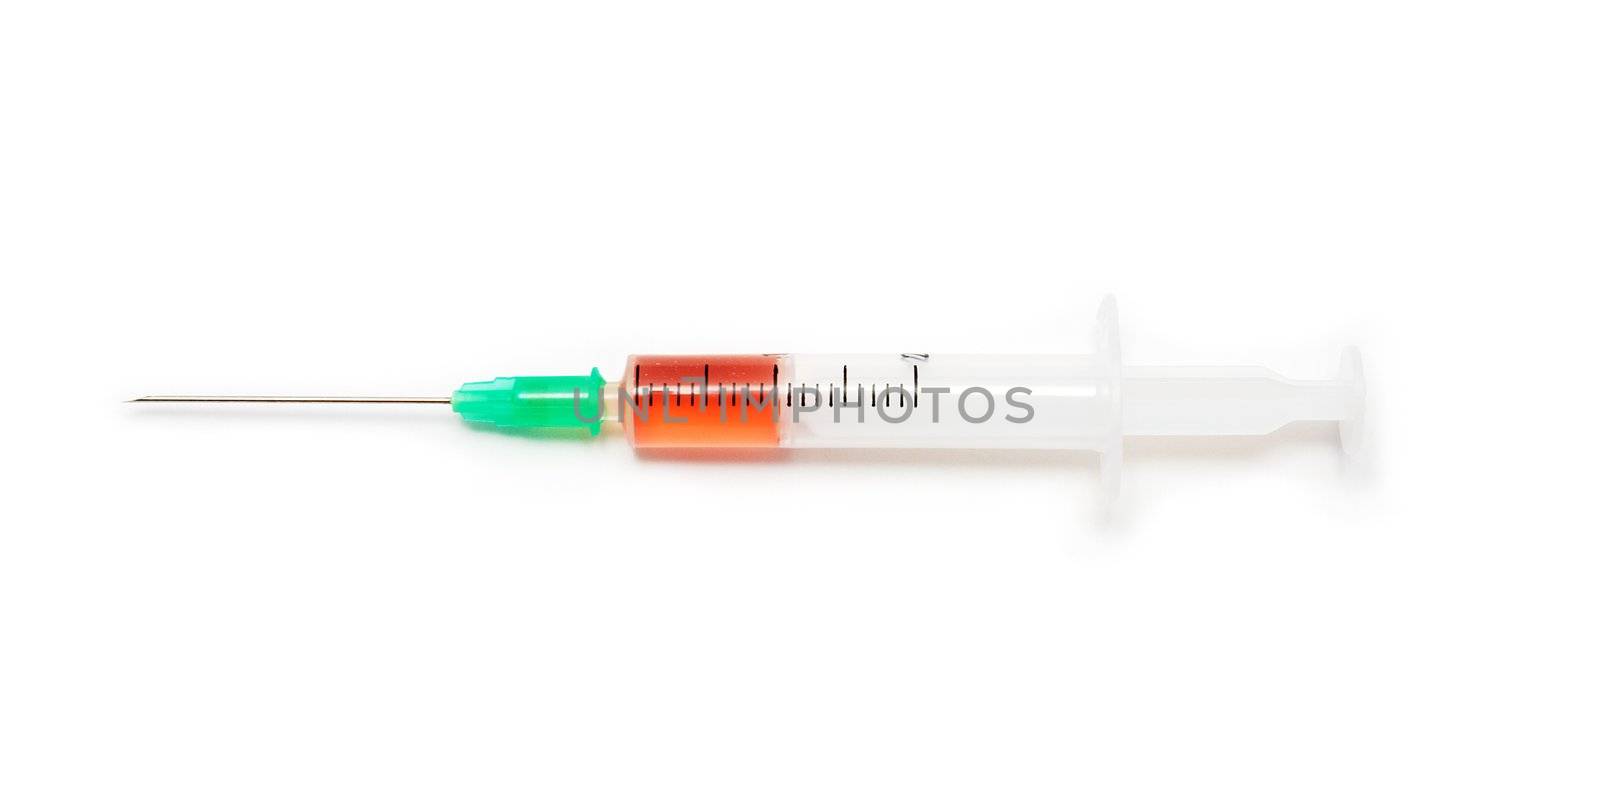 Syringe filled by two milliliters of red liquid substance